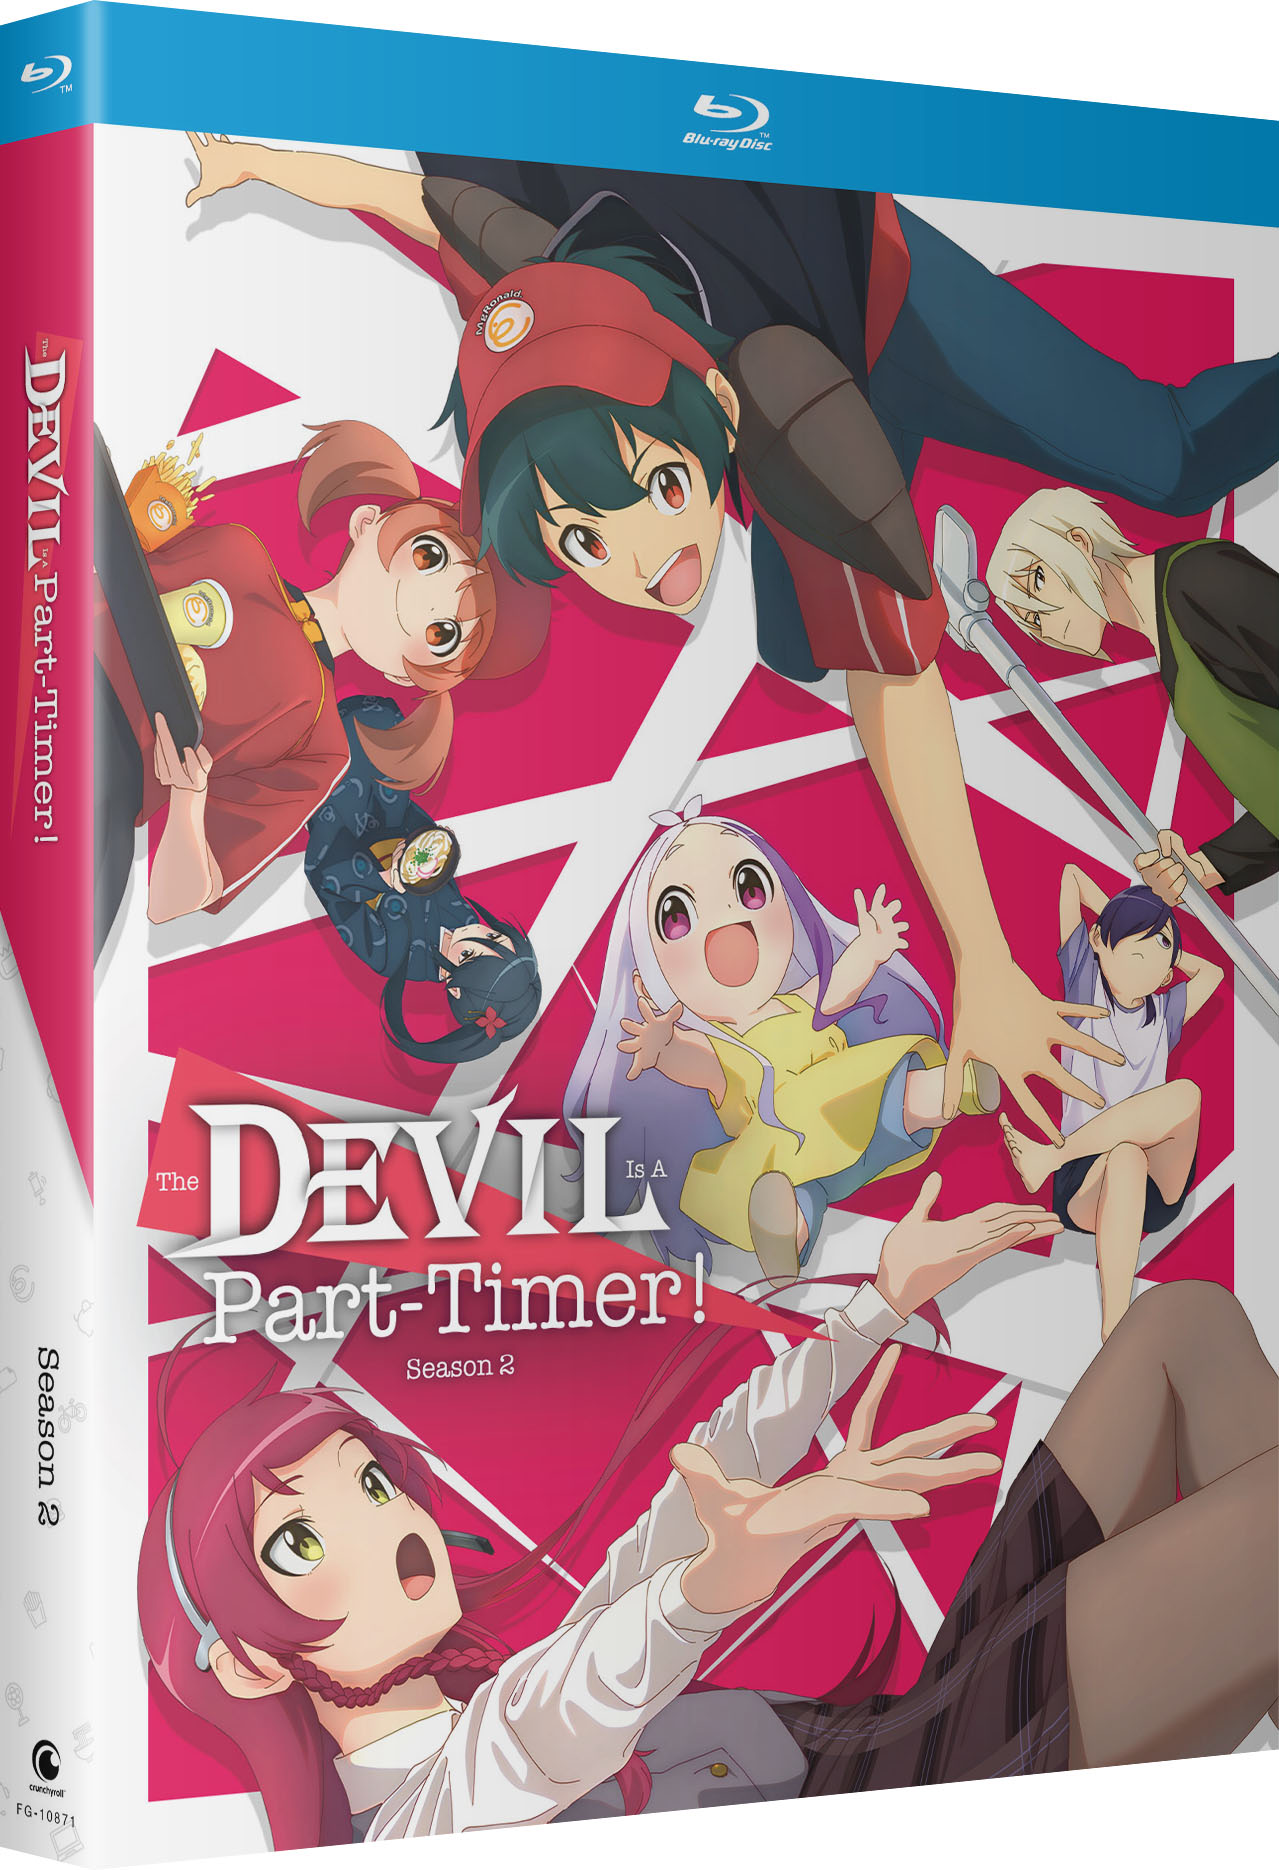 Hulu Schedules 'The Devil is a Part-Timer!' Anime Season 2 Part 2 English  Dubbed Streaming